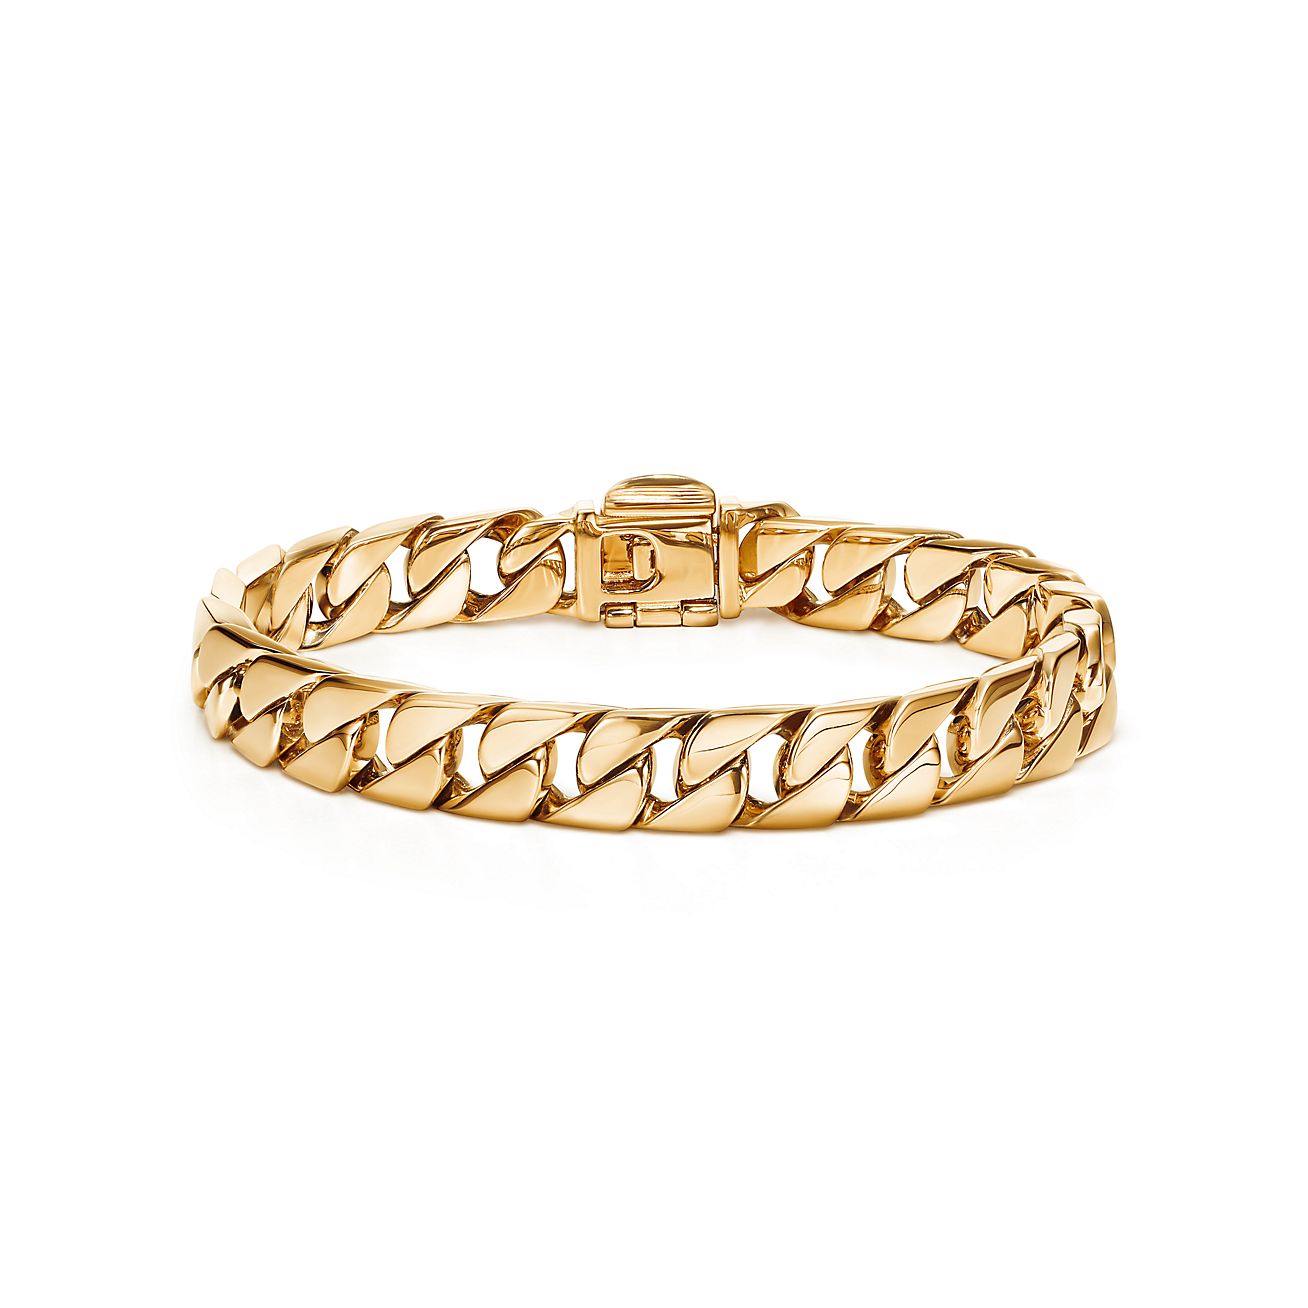 Gold Open Wire Bangle Bracelet – Charming Charlie